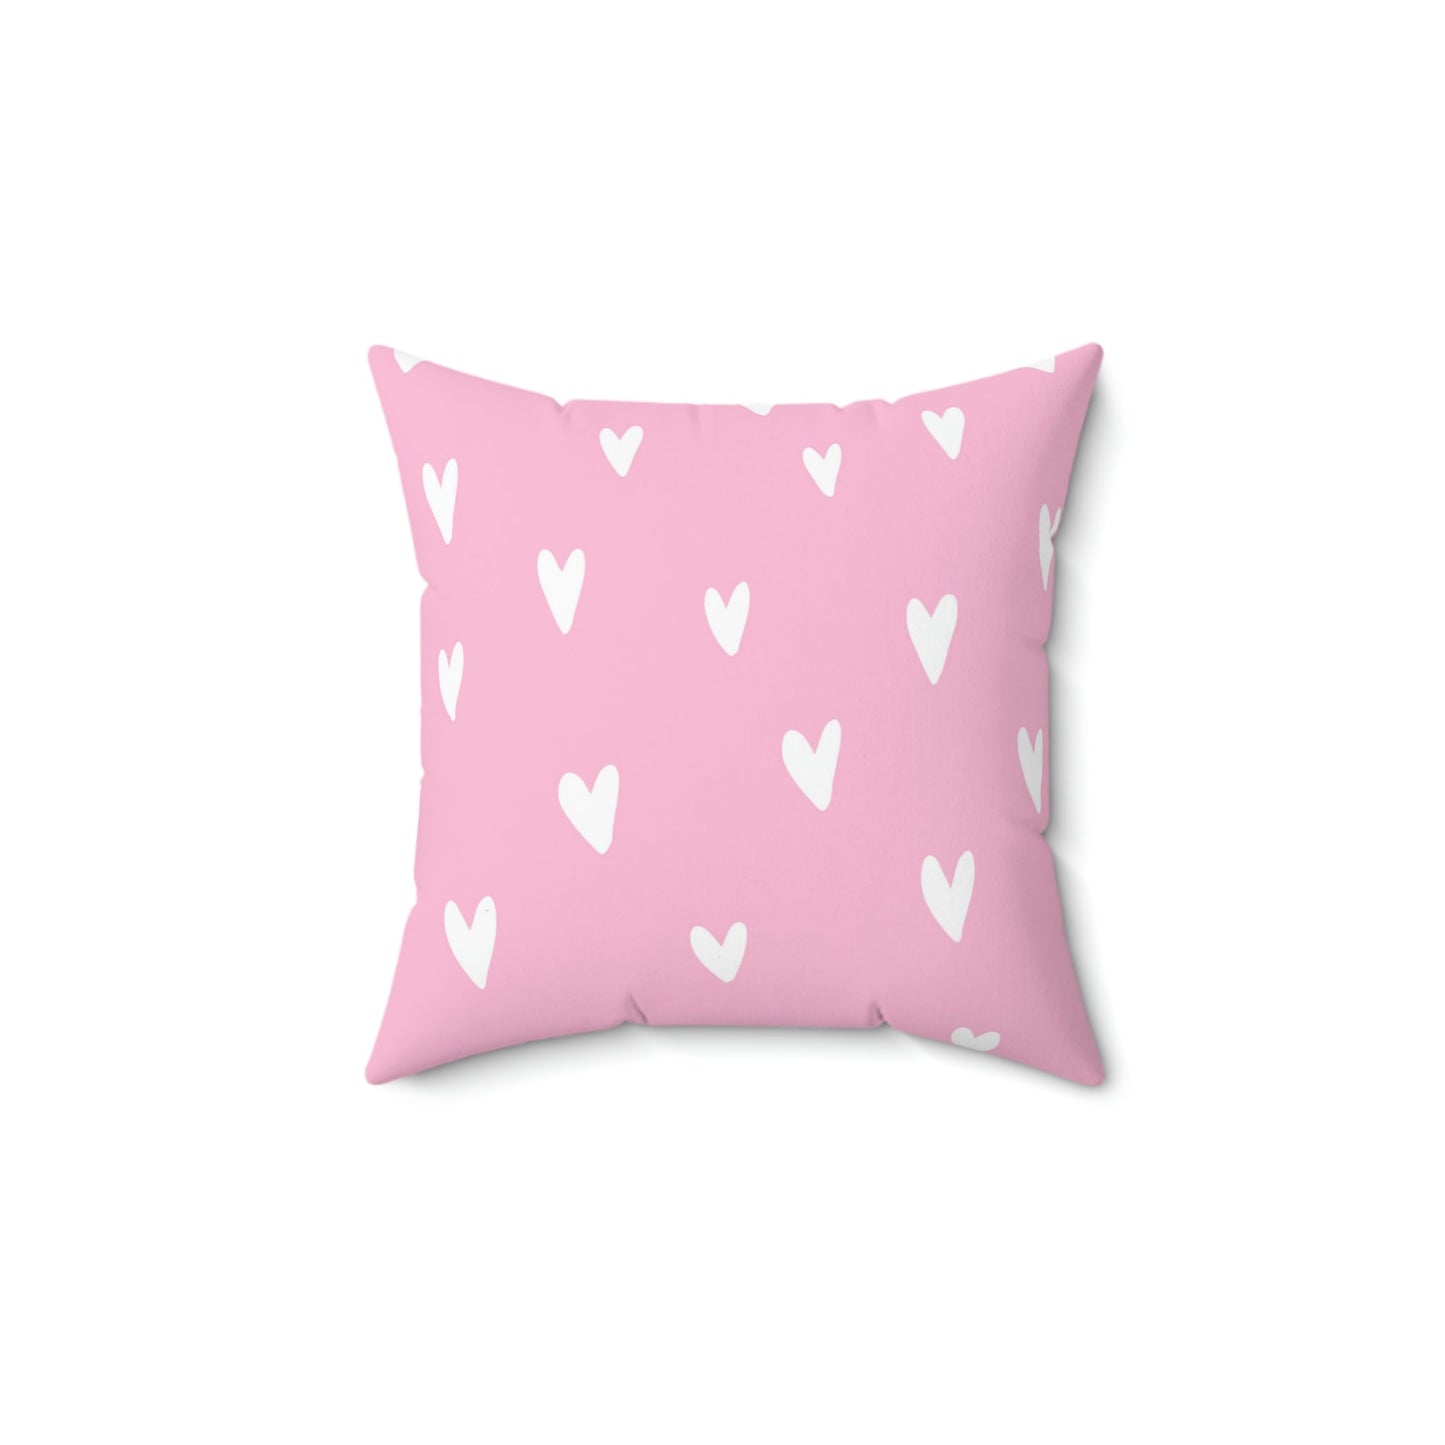 Sending a Thousand Hearts Square Pillow Home Decor Pink Sweetheart